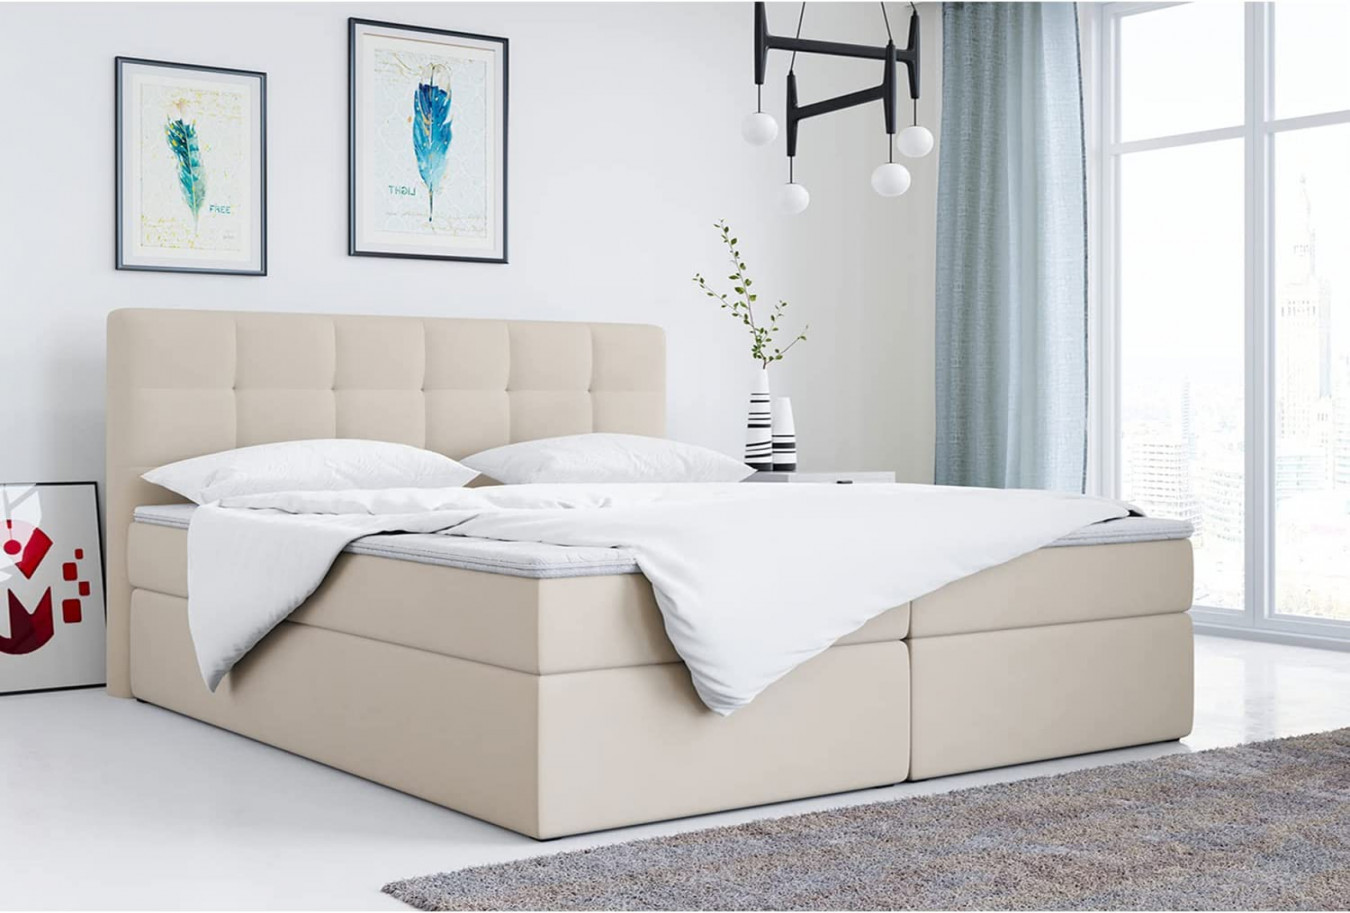 MKS MEBLE TOP Box Spring Bed  x 00 cm Creamy Double